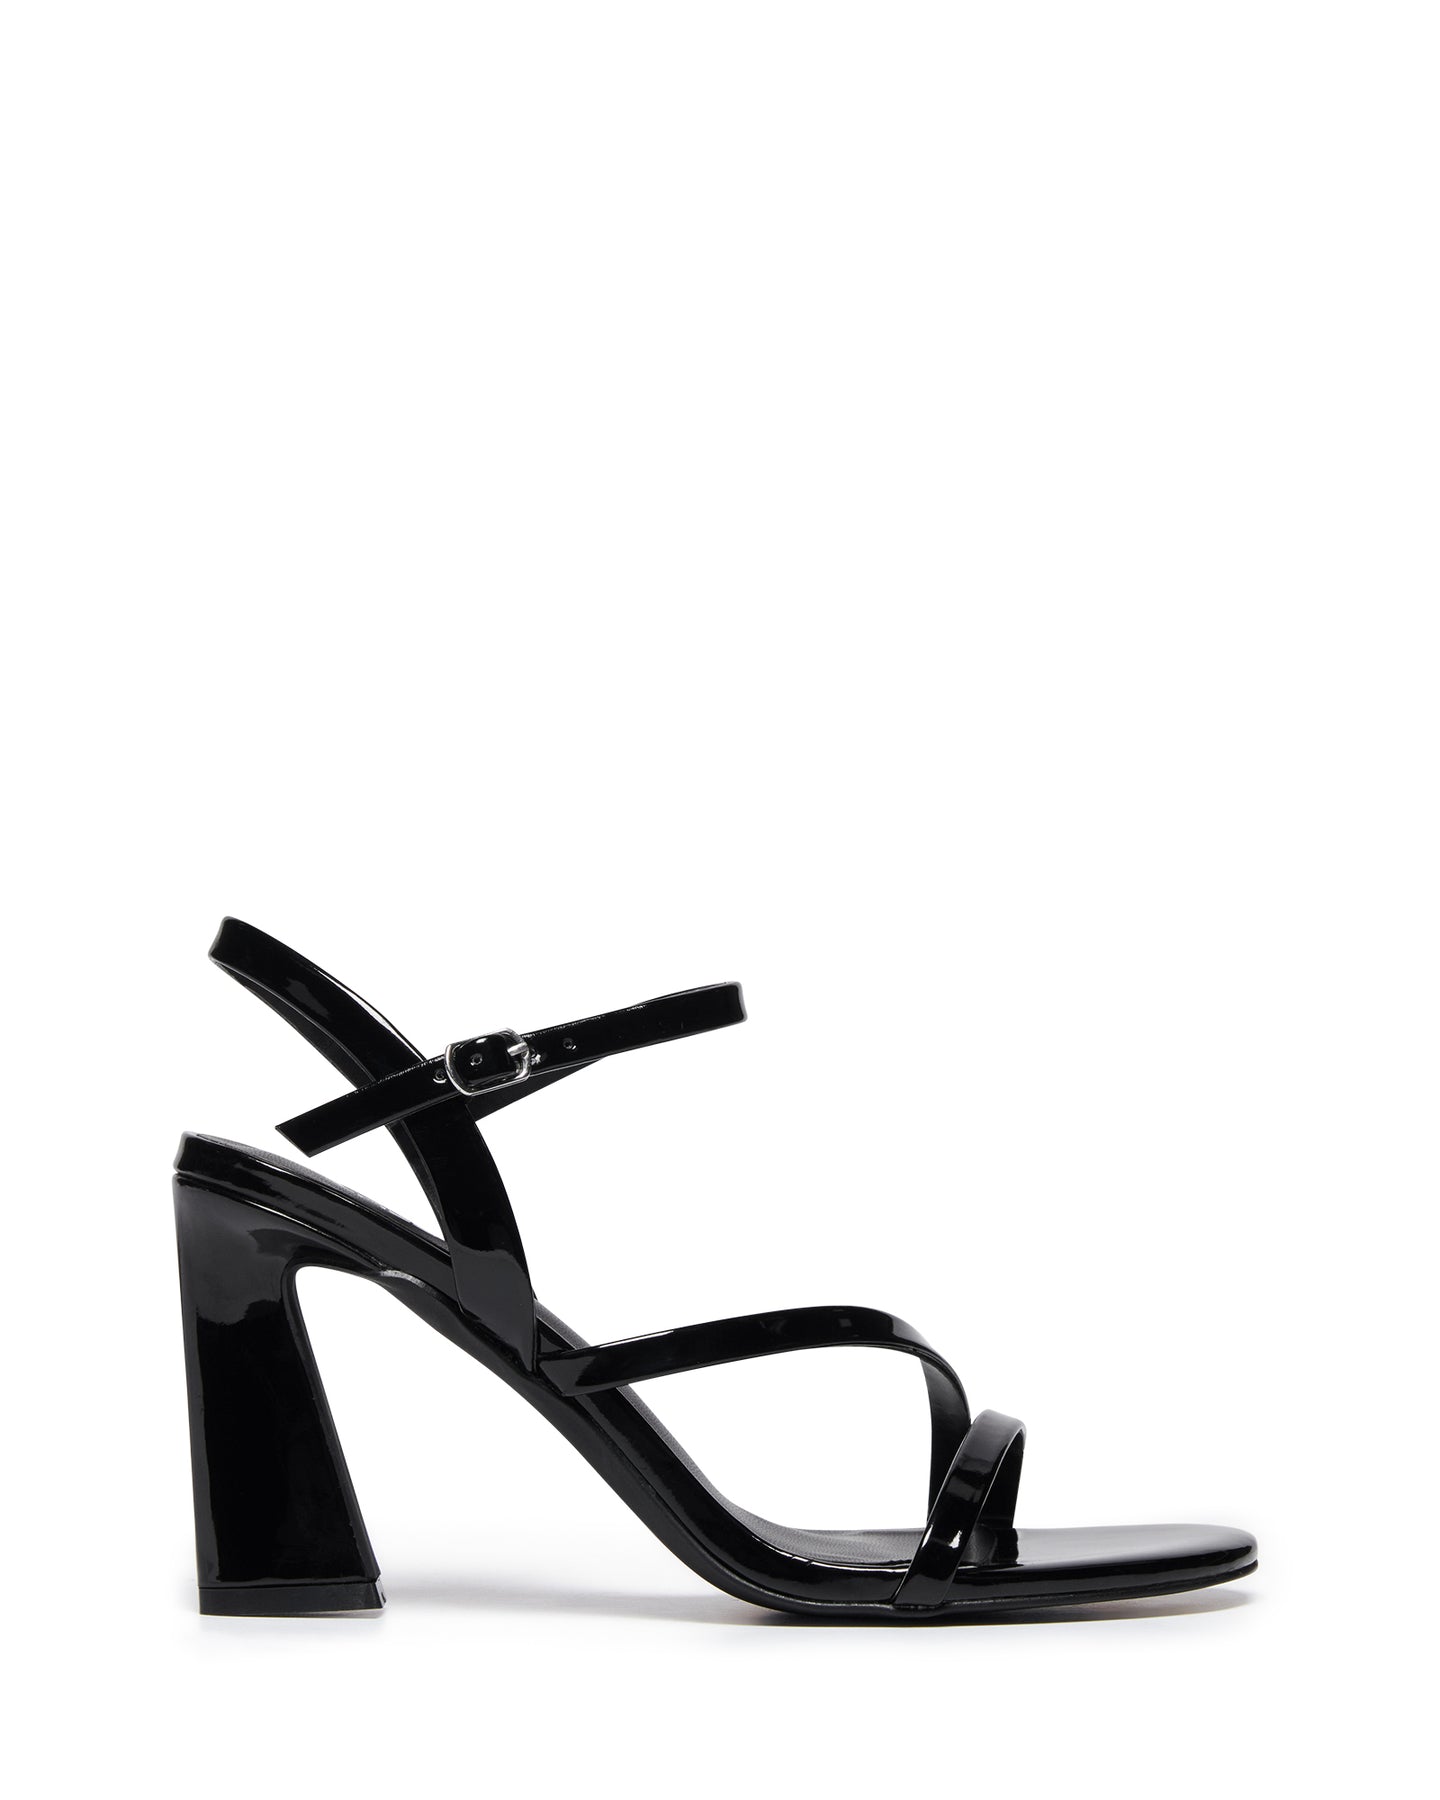 Looking Ahead Black Strappy Heels – Shop the Mint